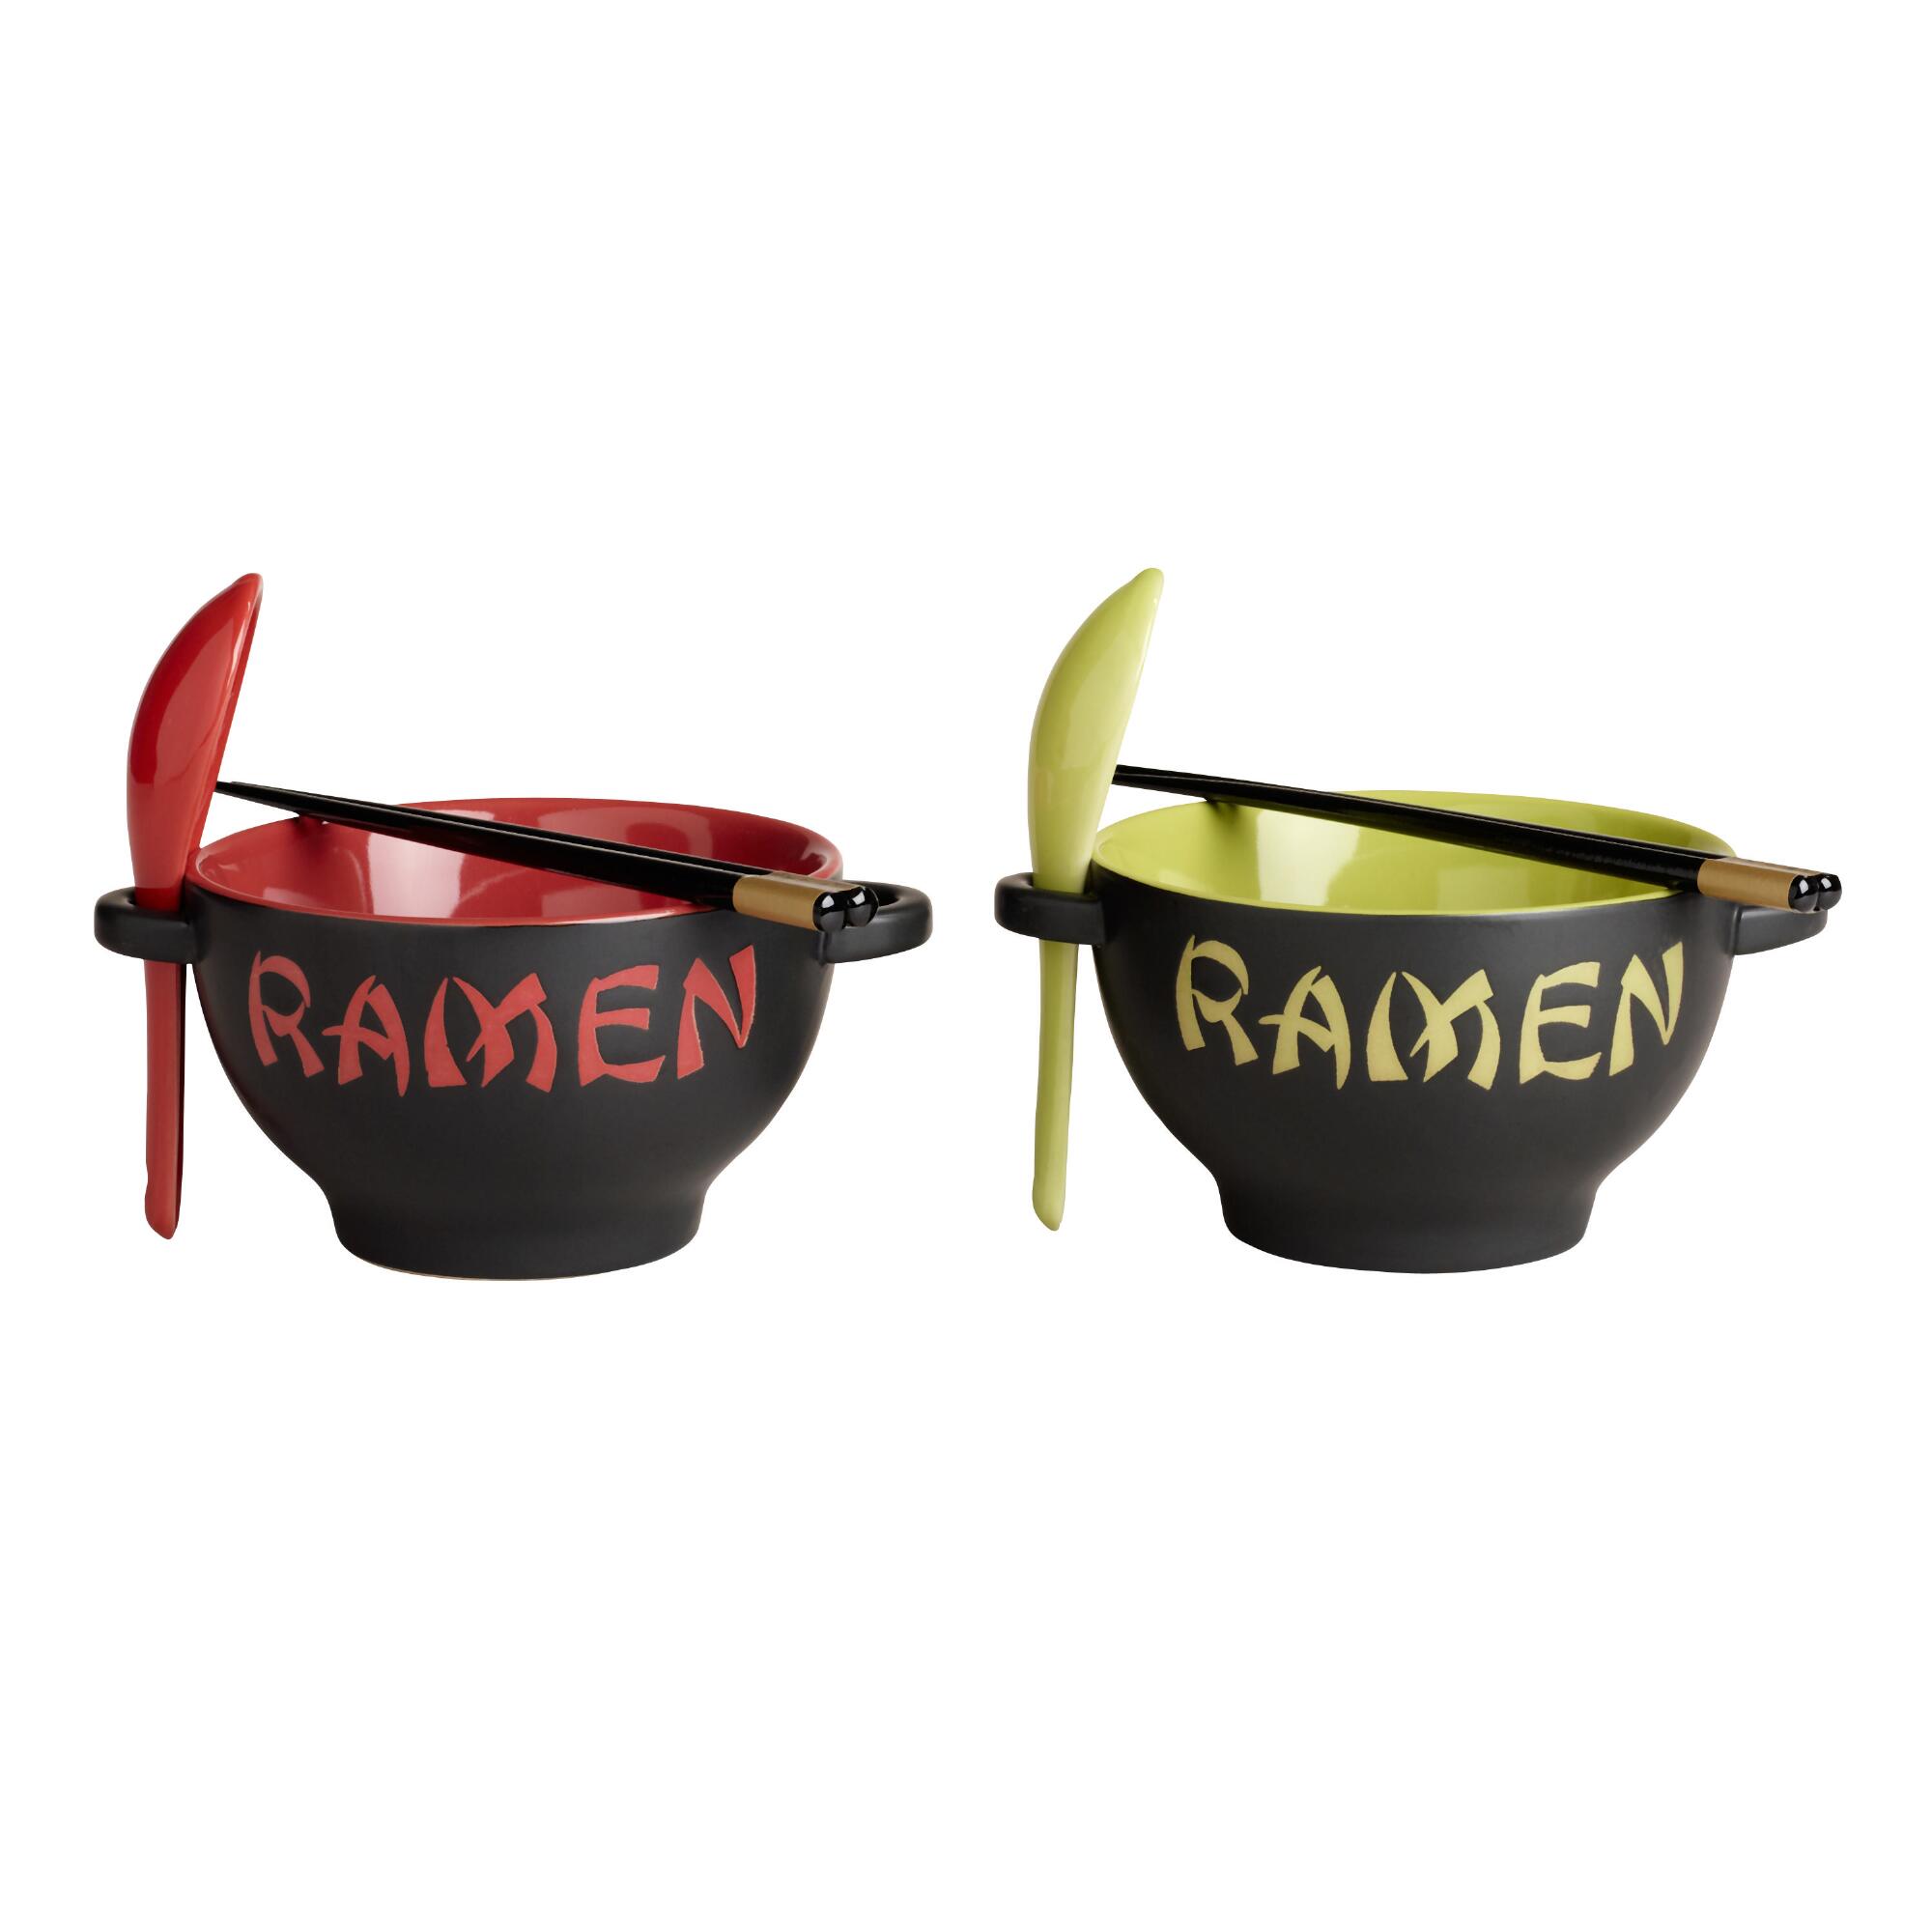 Red and Green Ramen Bowls With Utensils Set of 2: Black/Green/Multi - Stoneware by World Market